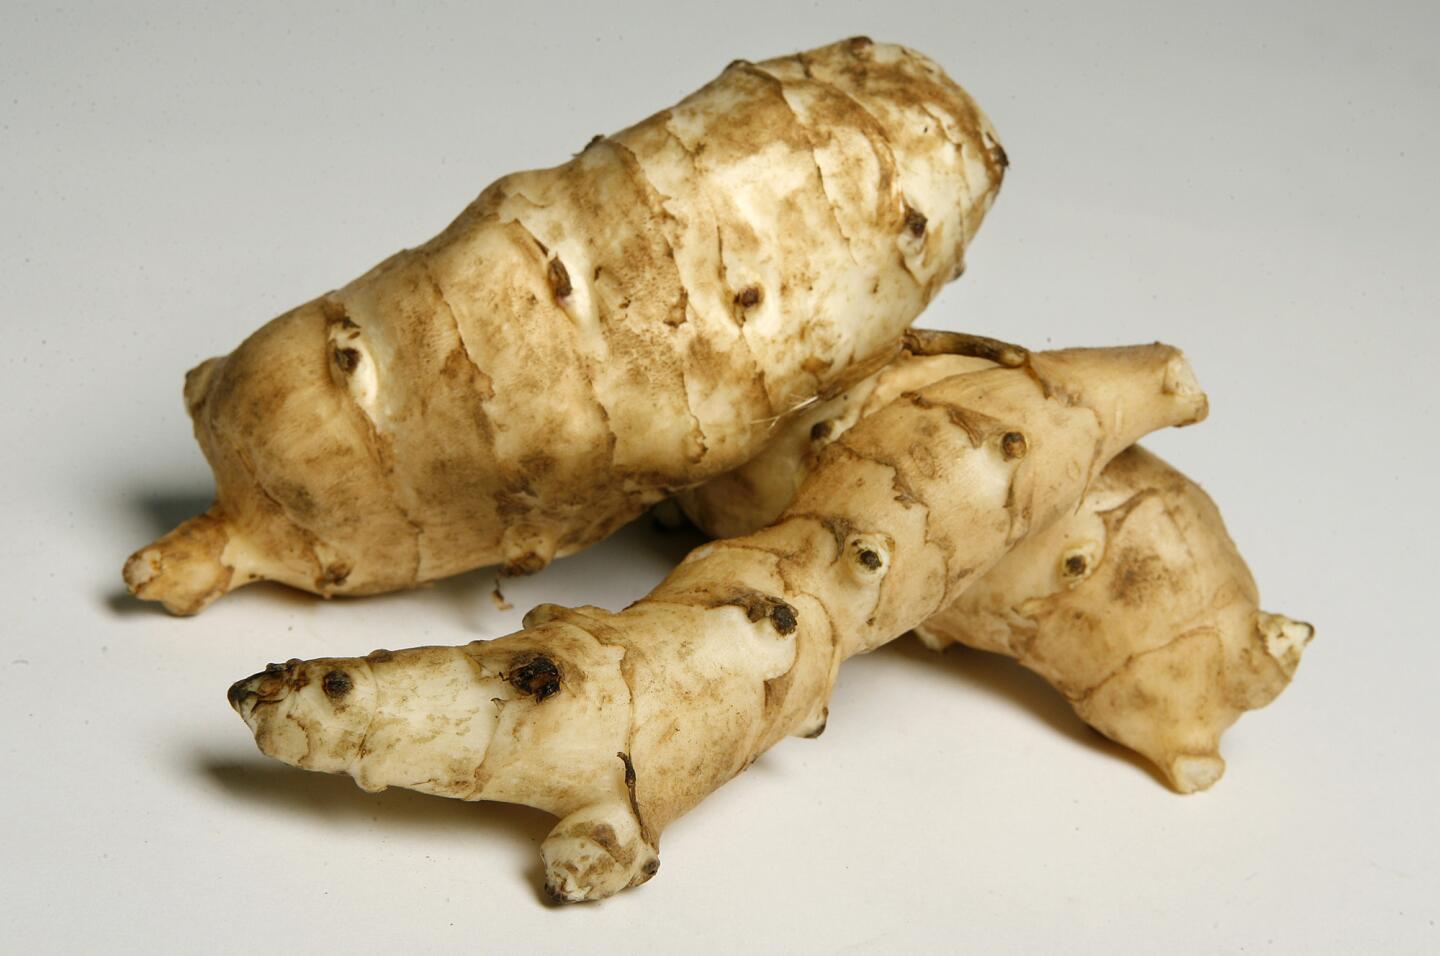 The tubers can be eaten raw but are better lightly cooked.